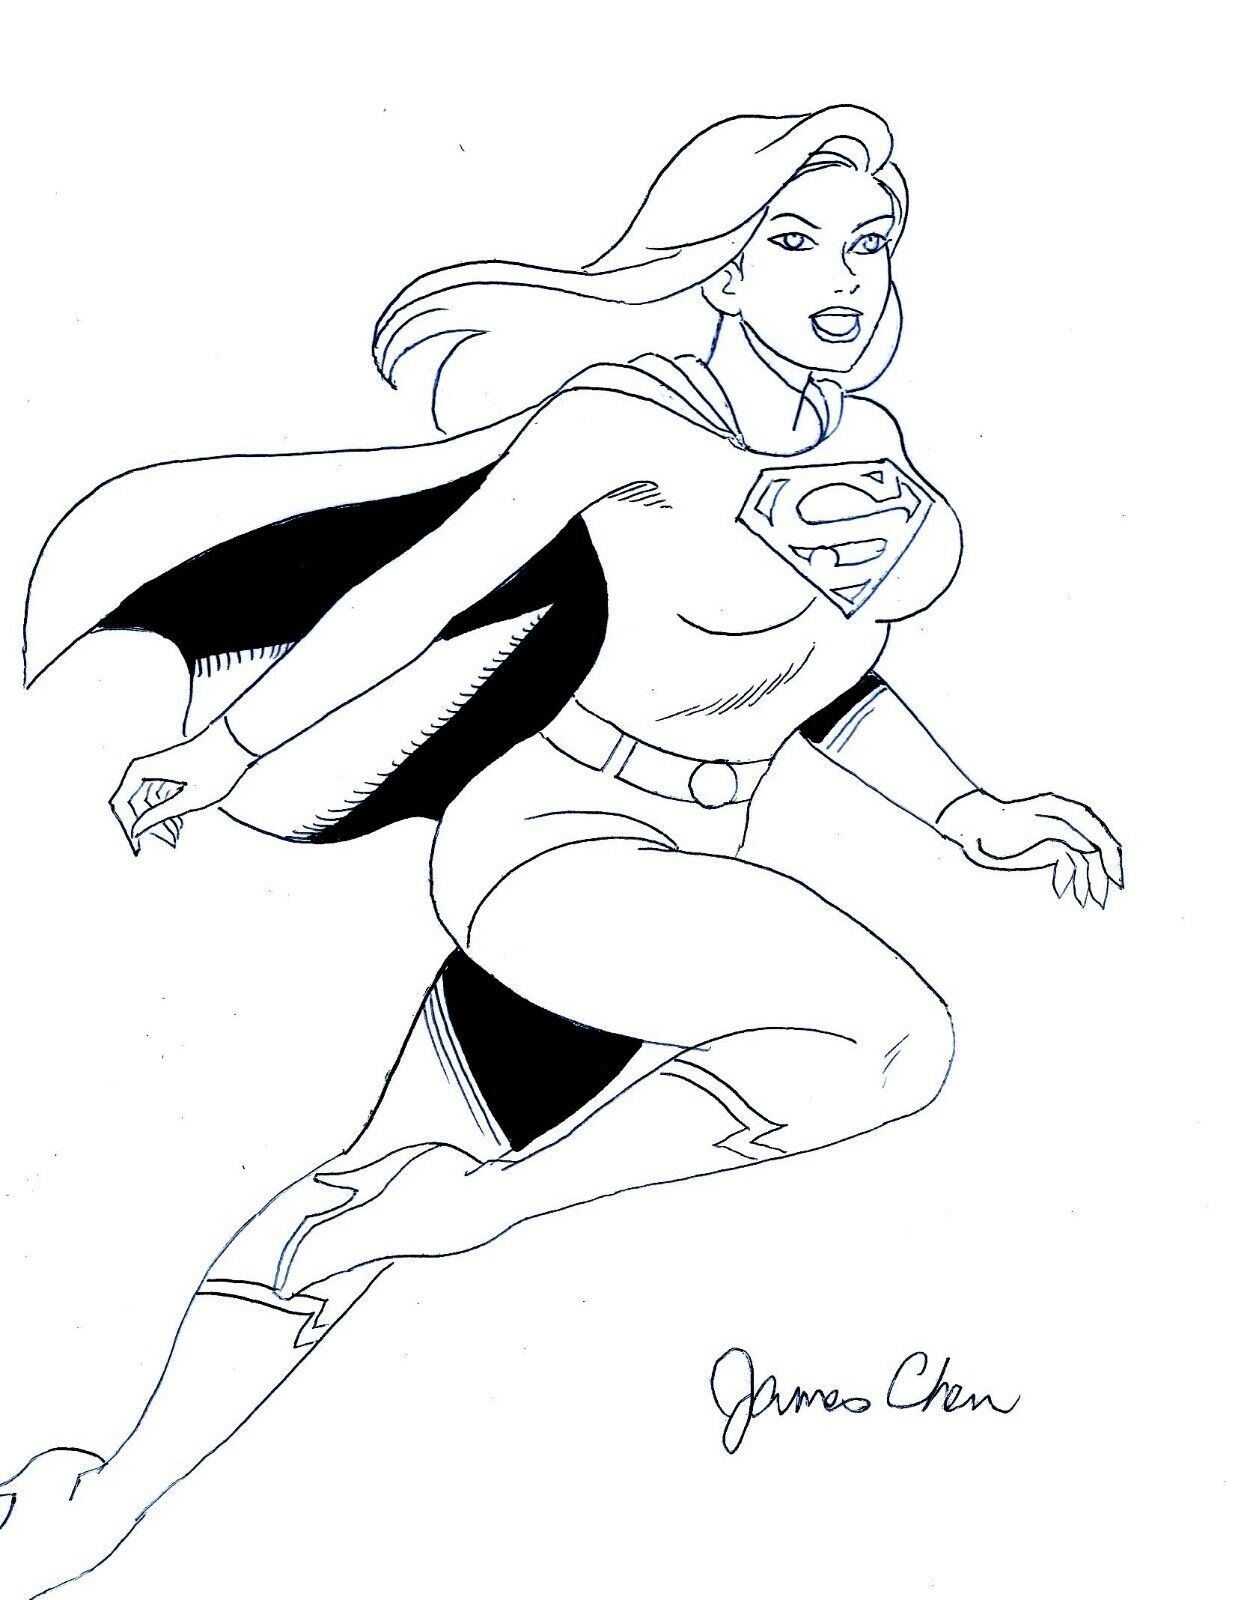 Supergirl original ic art black ink sketch on card stock by james chen